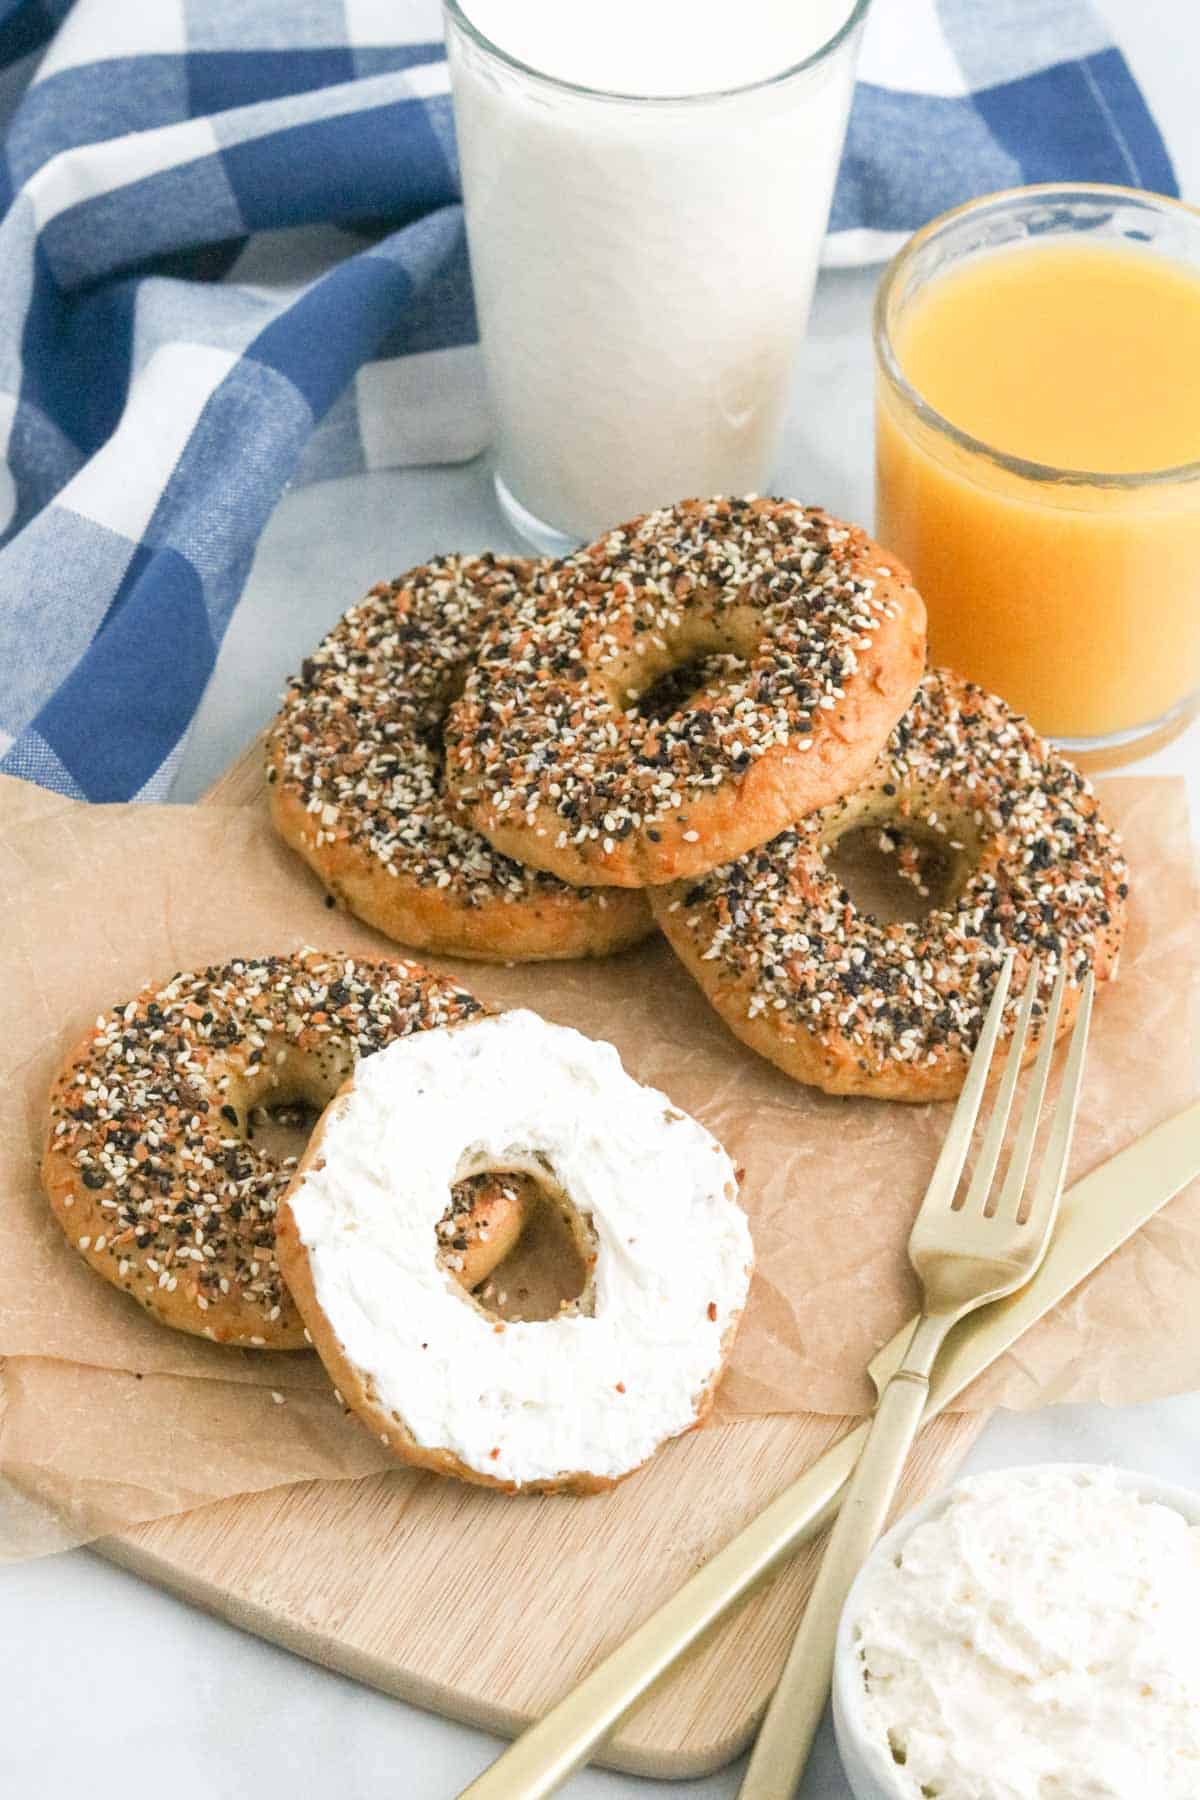 Gluten free Everything bagels, with one sliced open and spread with cream cheese.